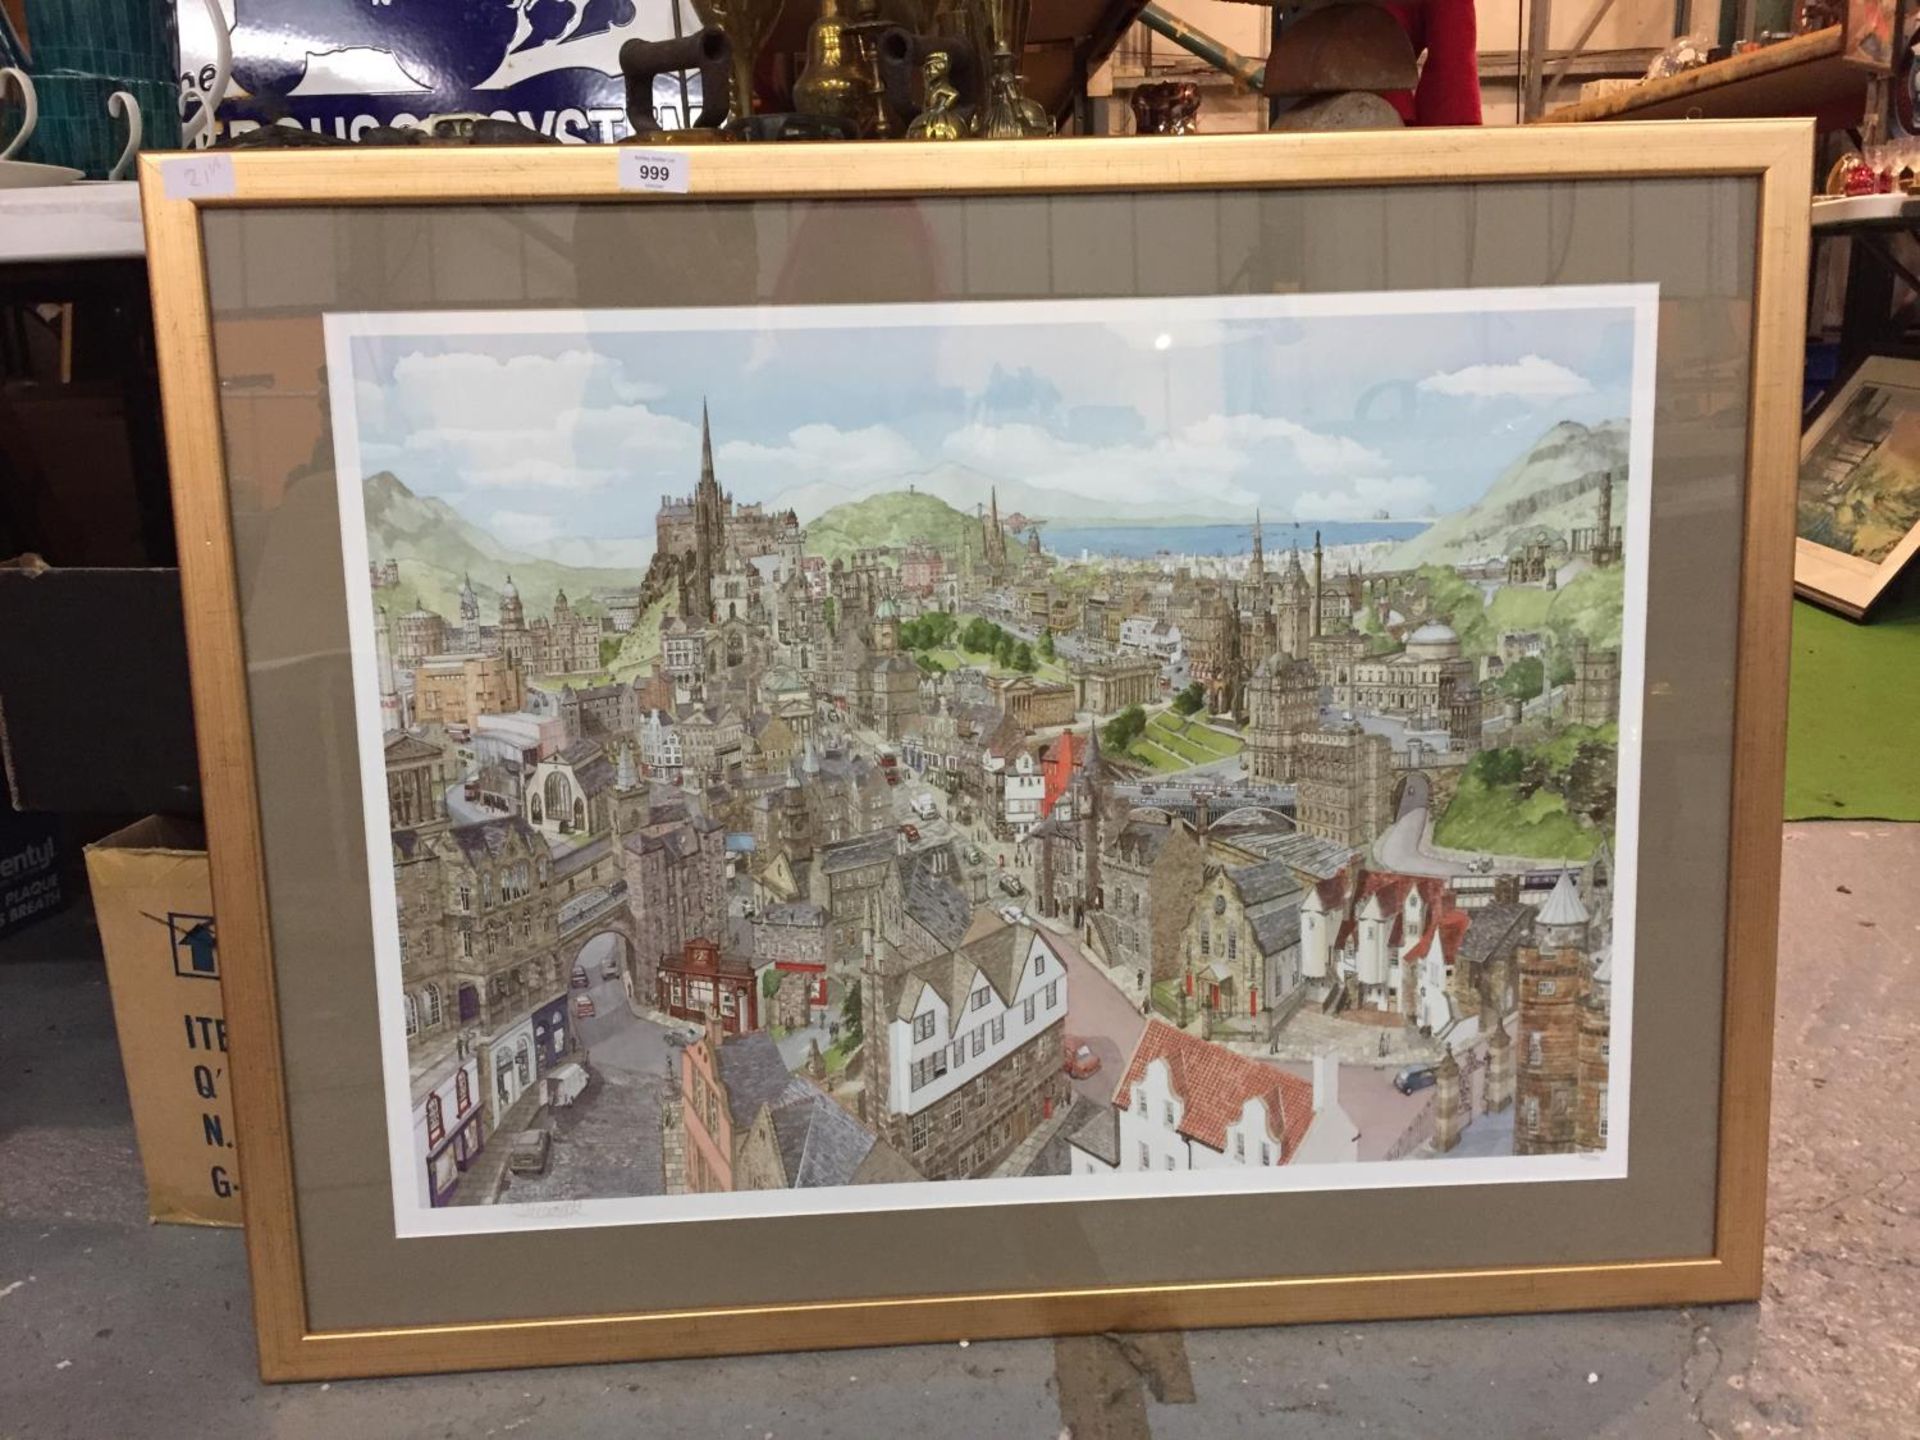 A FRAMED LIMITED EDITION 'MEMORIES OF EDINBURGH' PRINT BY STUART MOORE 427/1500